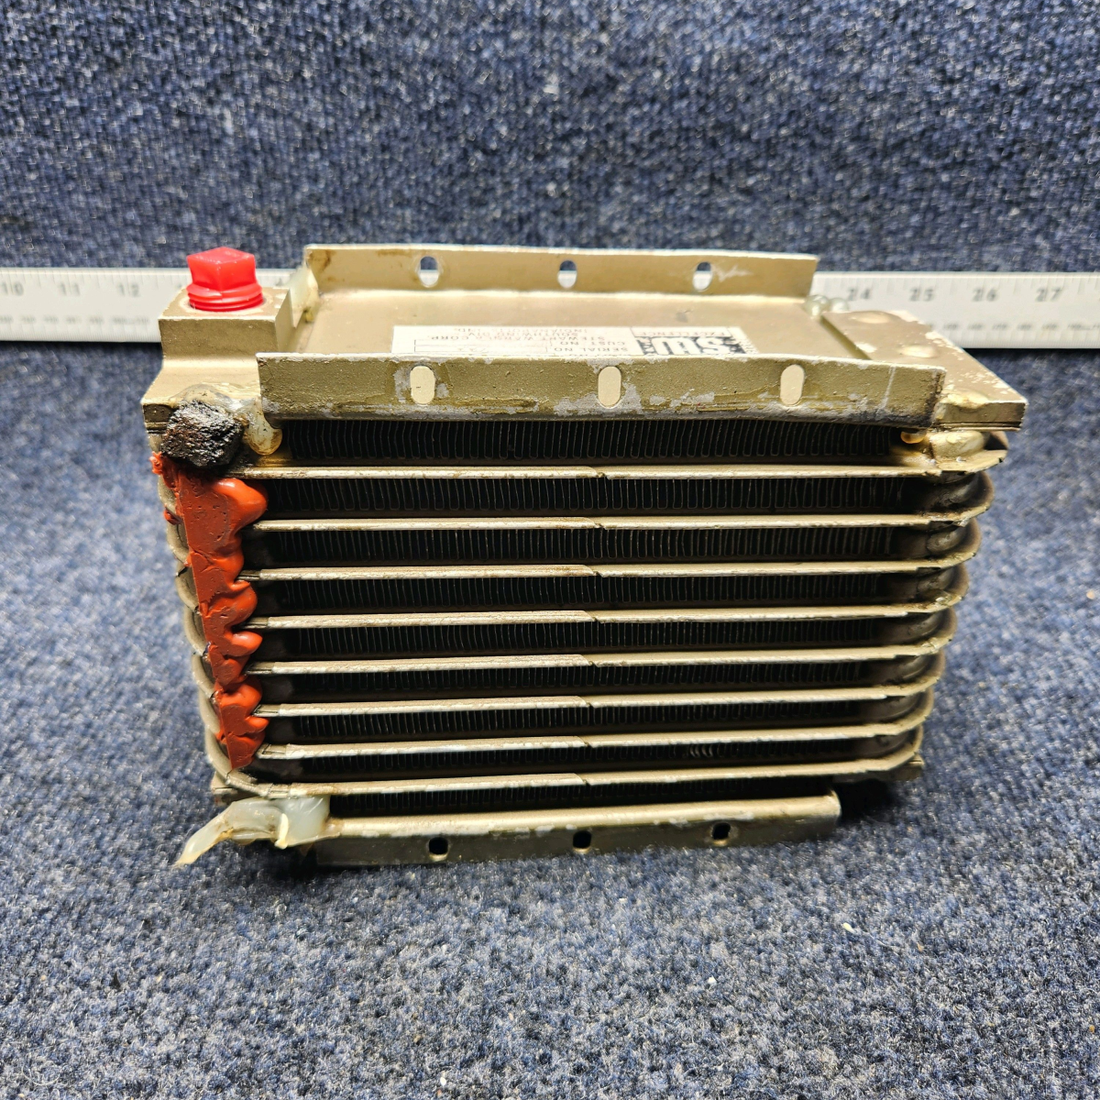 Used aircraft parts for sale, 8432L Lycoming Textron OIL COOLER ASSEMBLY "SEE PHOTOS"